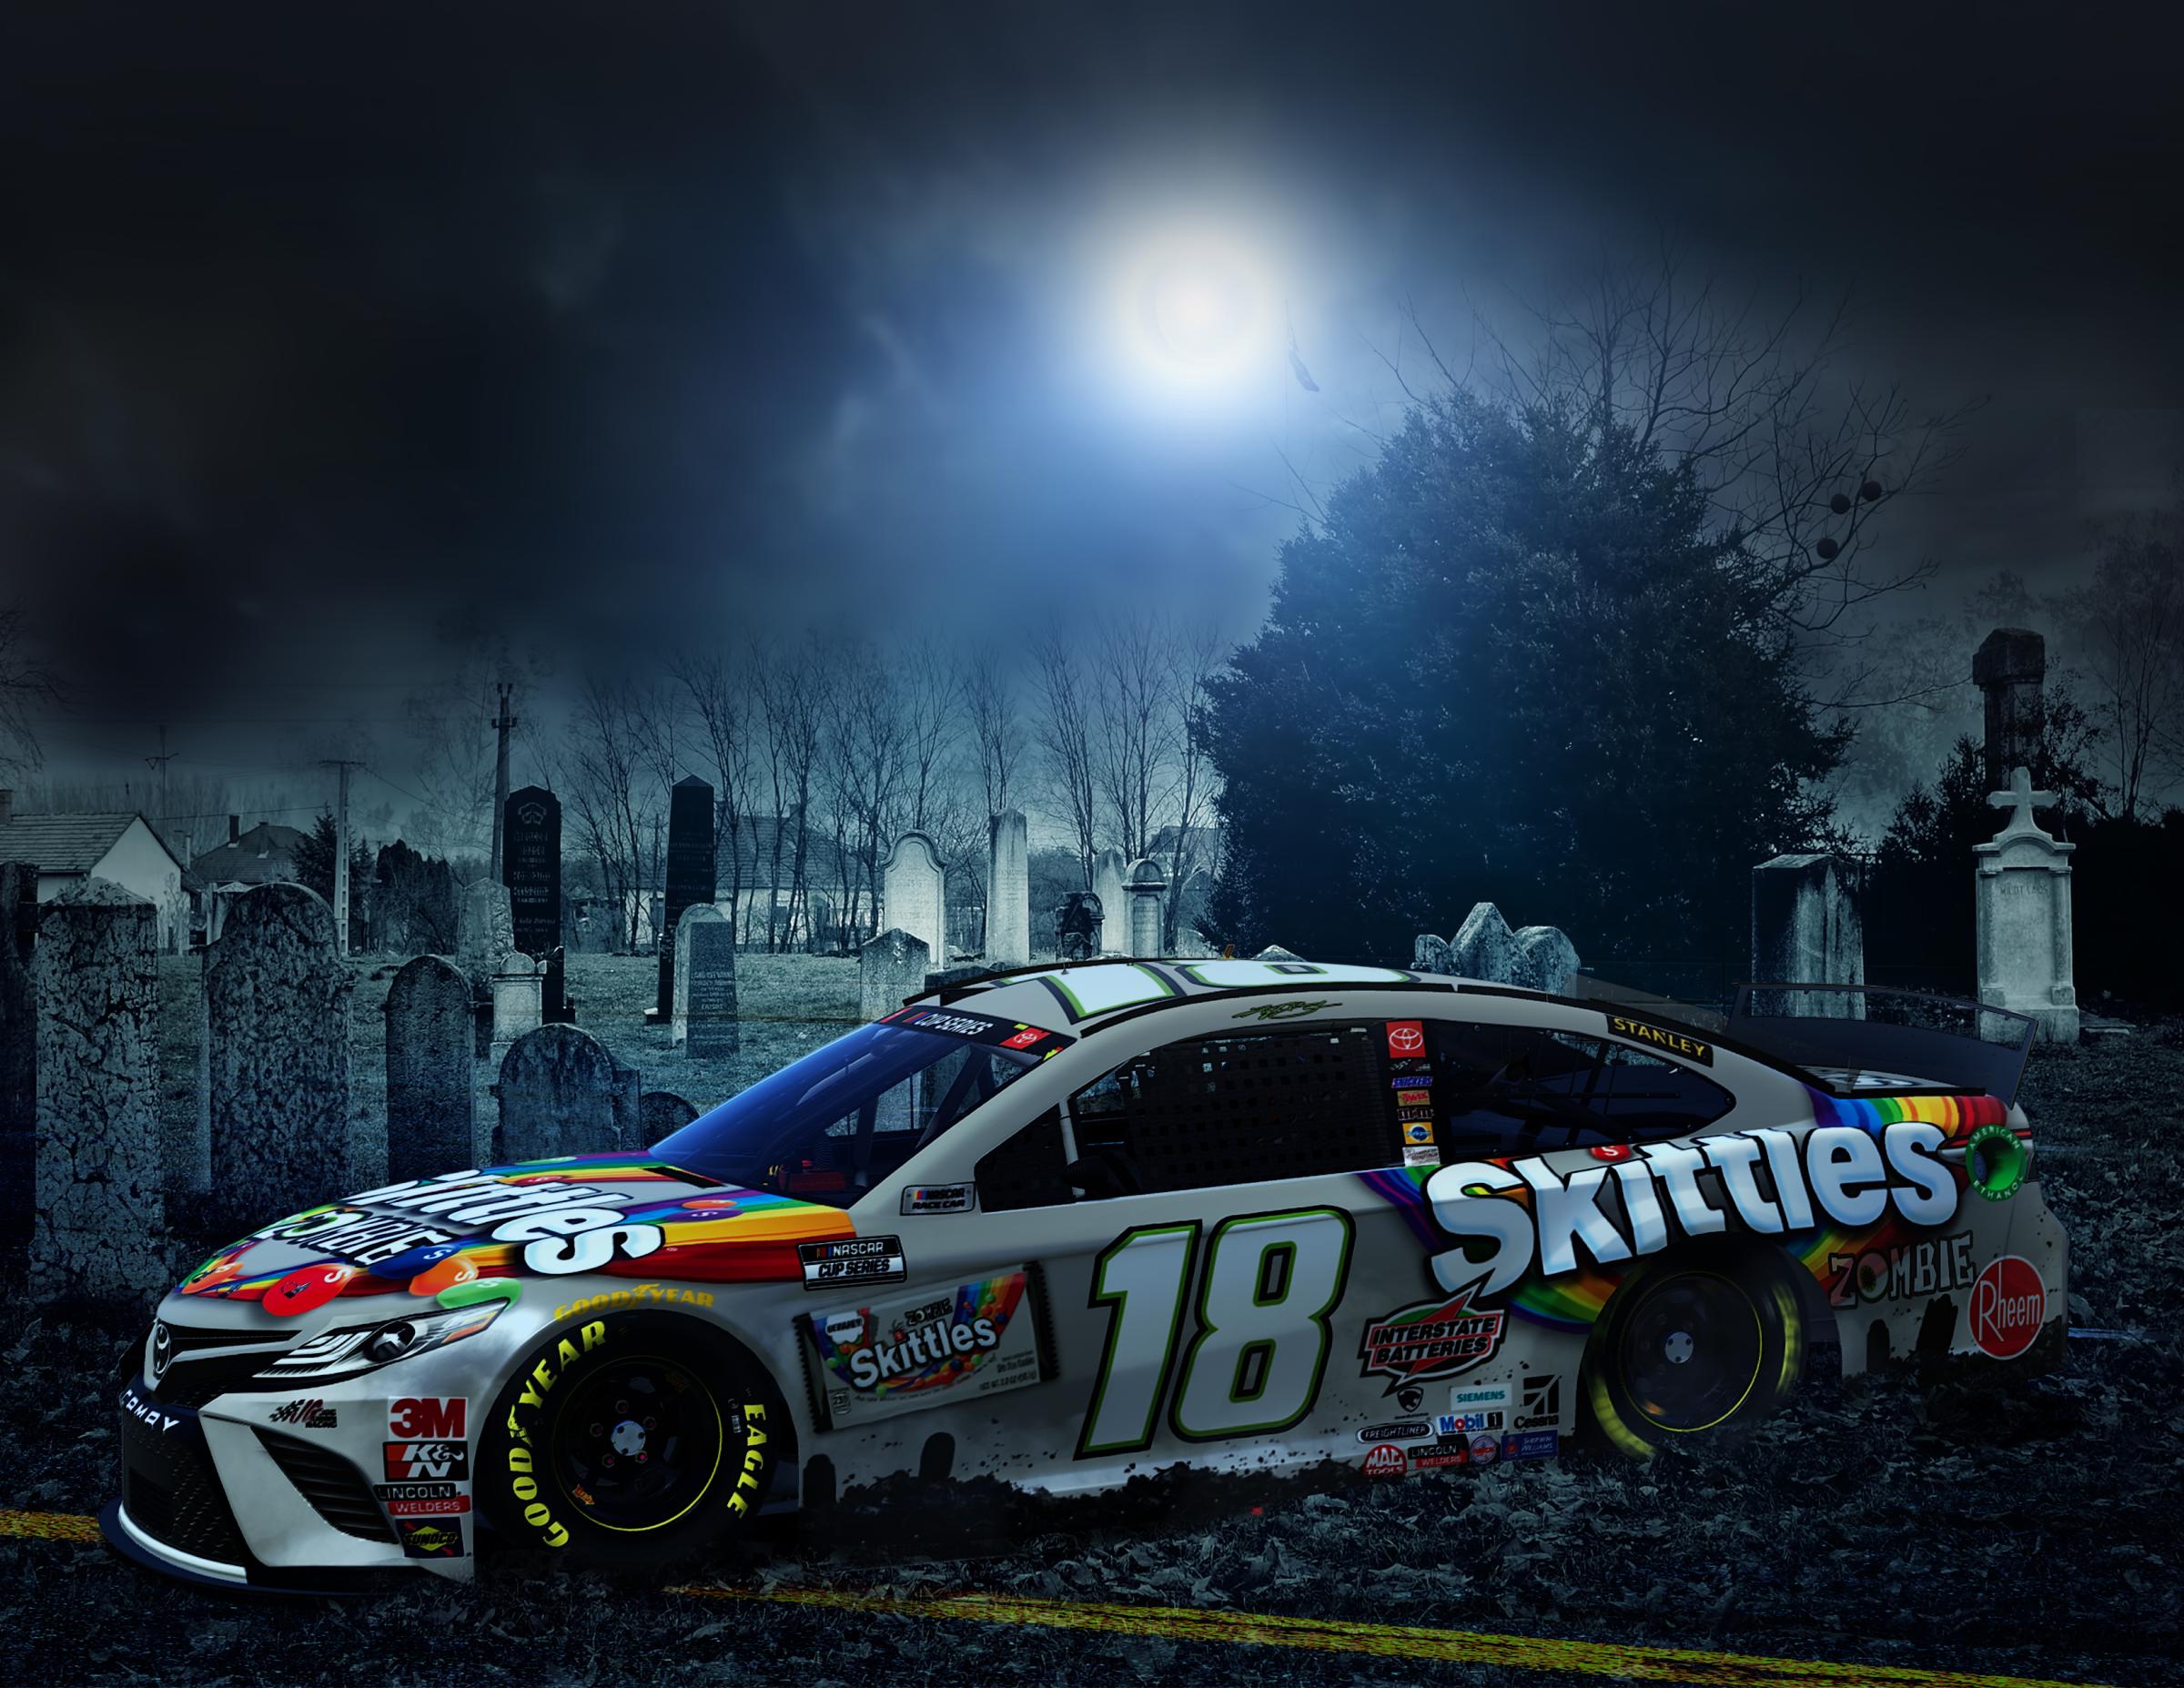 2020 Kyle Busch Skittles Zombie Camry by Brantley Roden - Trading Paints